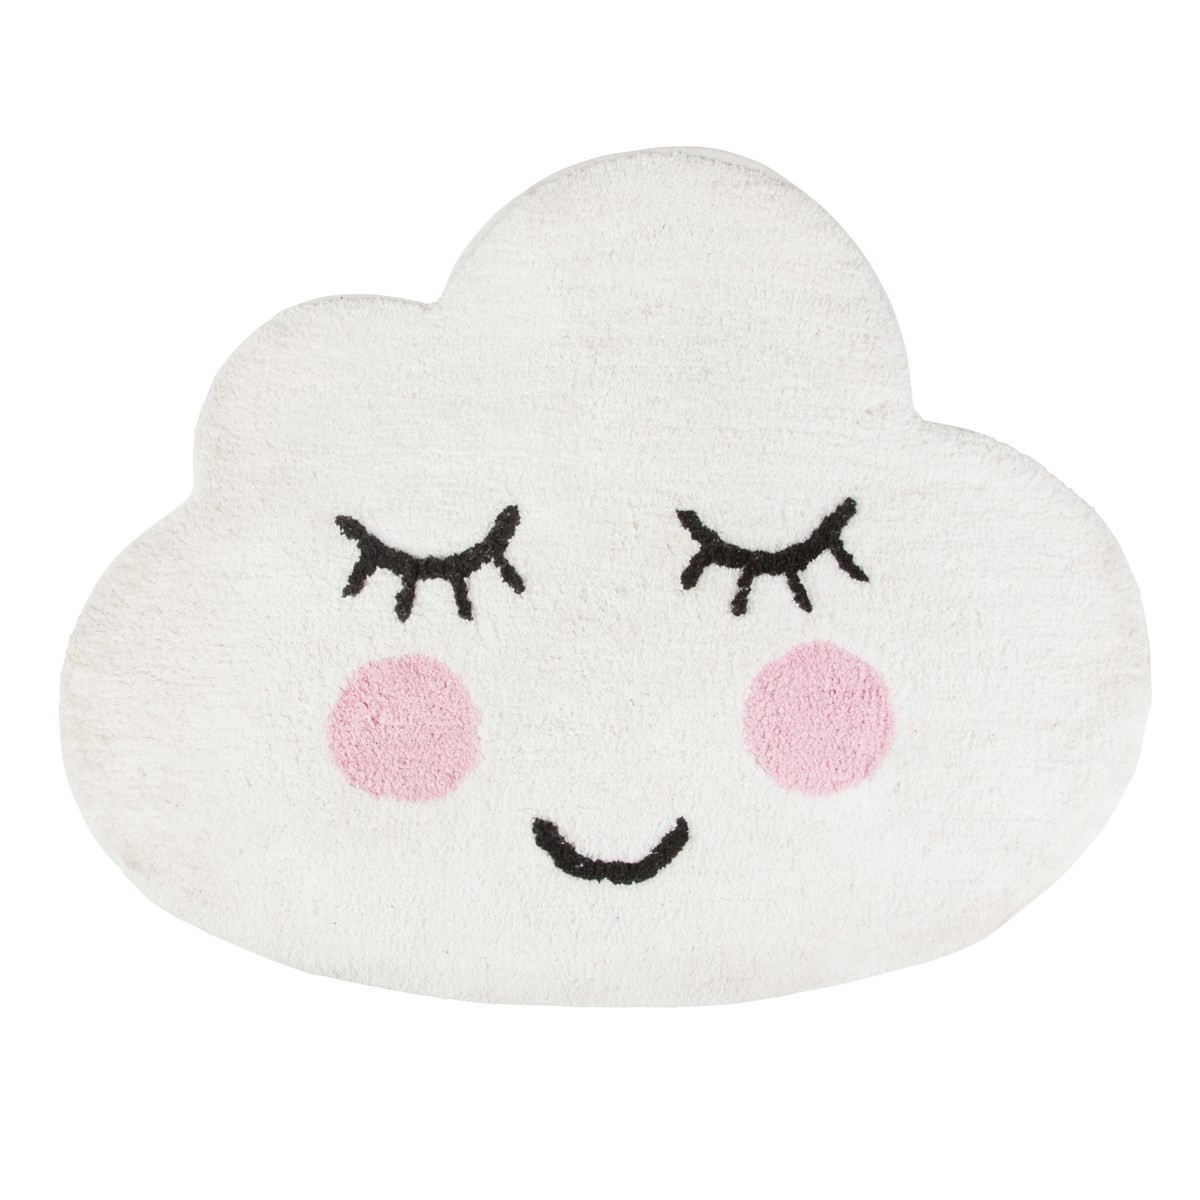 Sass & Belle Sweet Dreams Smiling Cloud Rug - White>